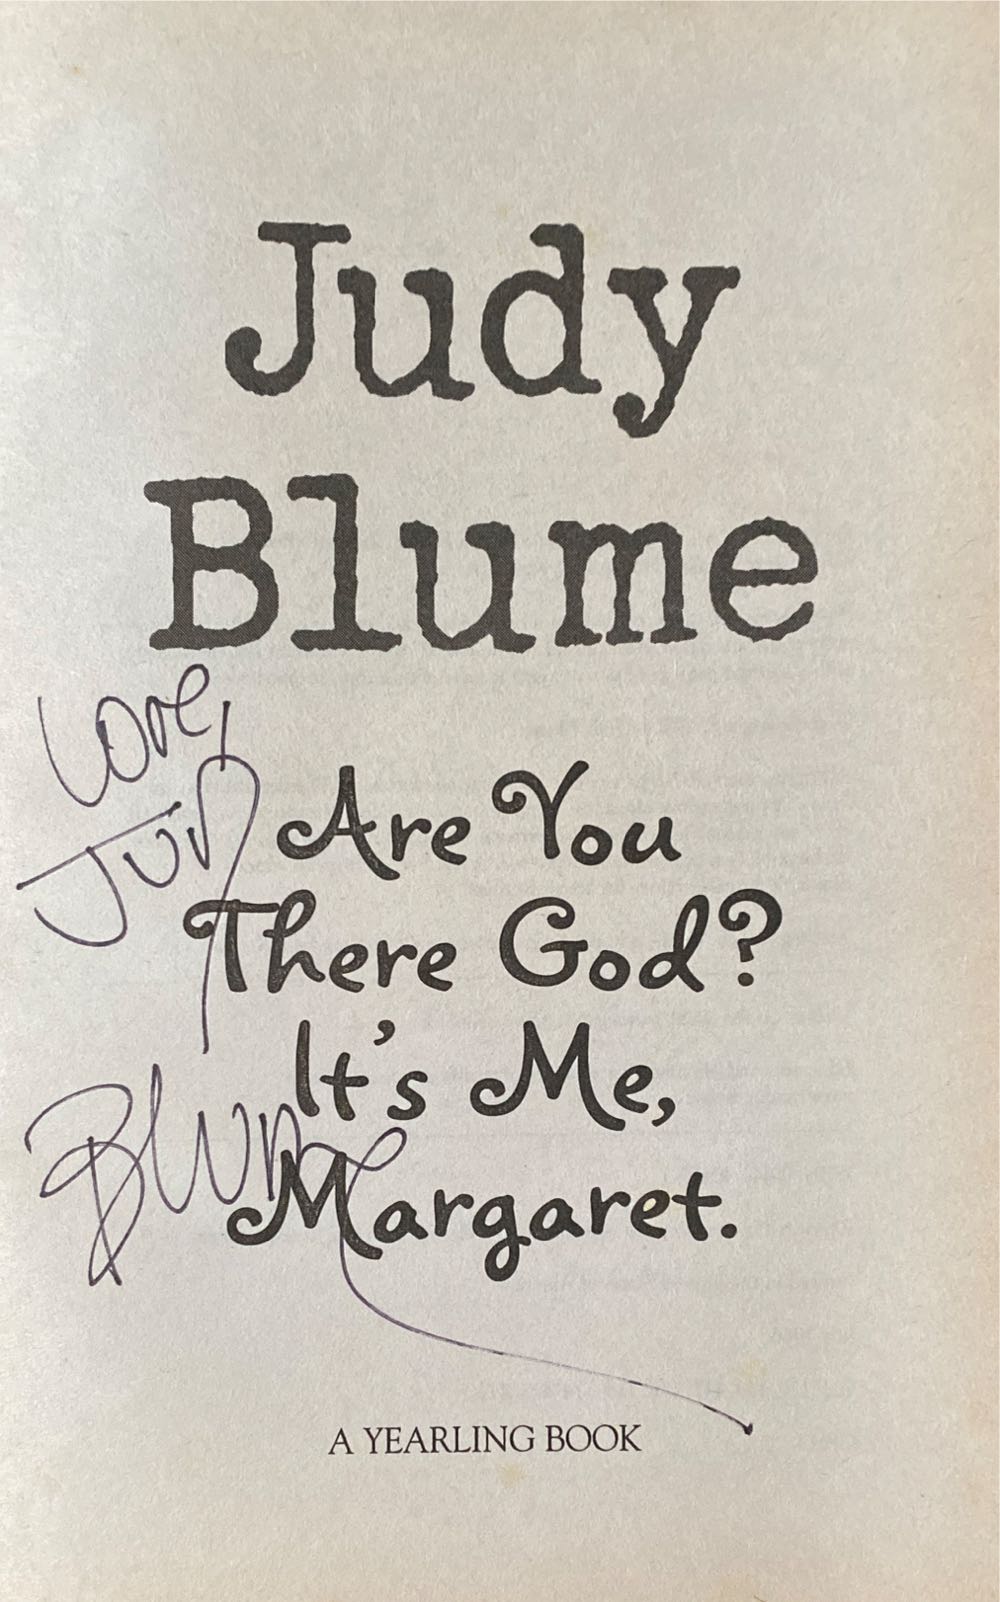 Are You There God? It’s Me, Margaret - Judy Blume (A Yearling Book - Paperback) book collectible [Barcode 9780440404194] - Main Image 3